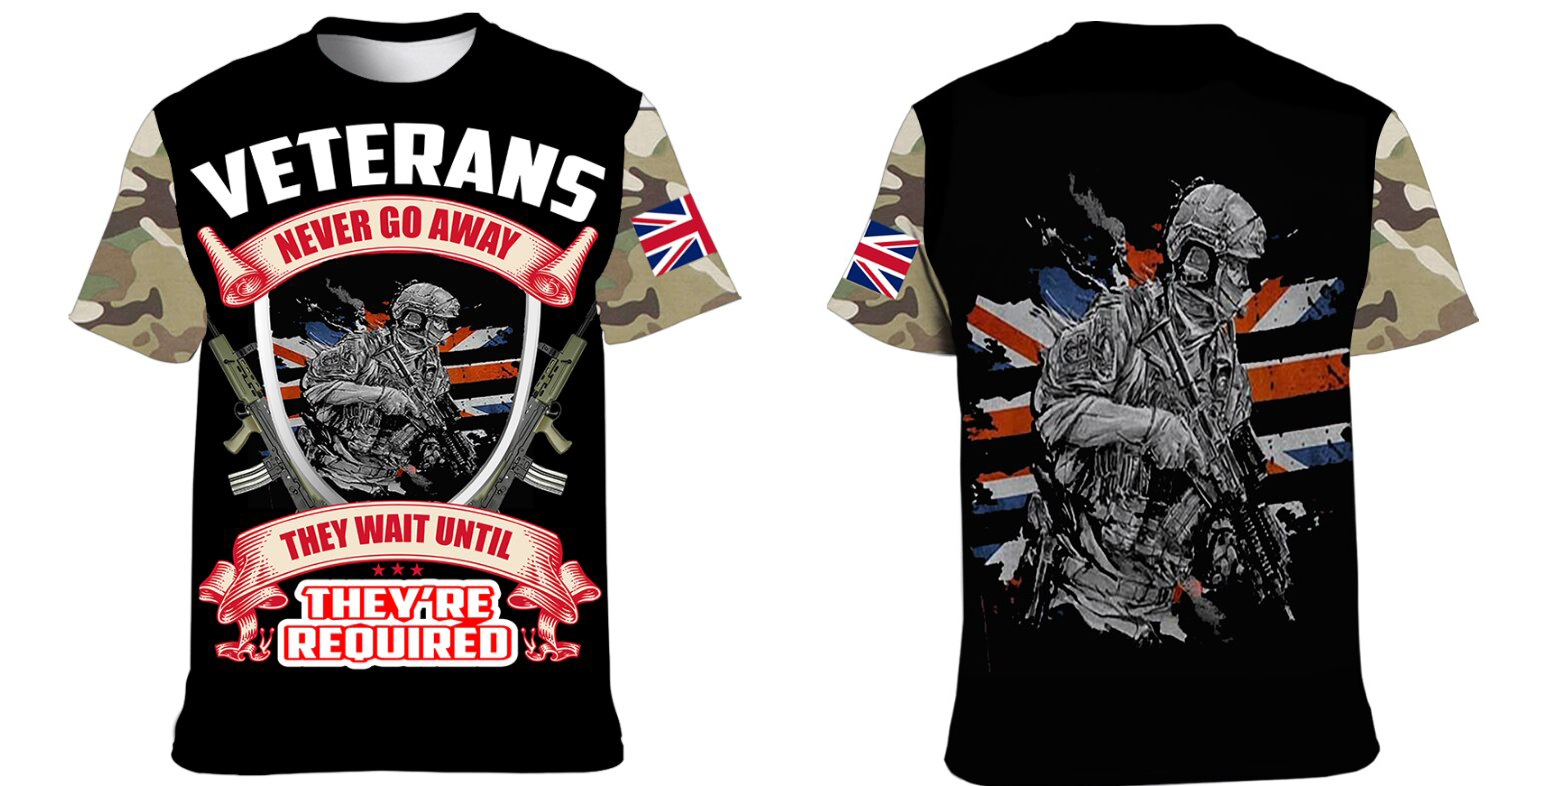 VETERANS Double Printed T-Shirt new 2023 - Army 1157 kit Asian Size L = to UK Small Army 1157 Kit